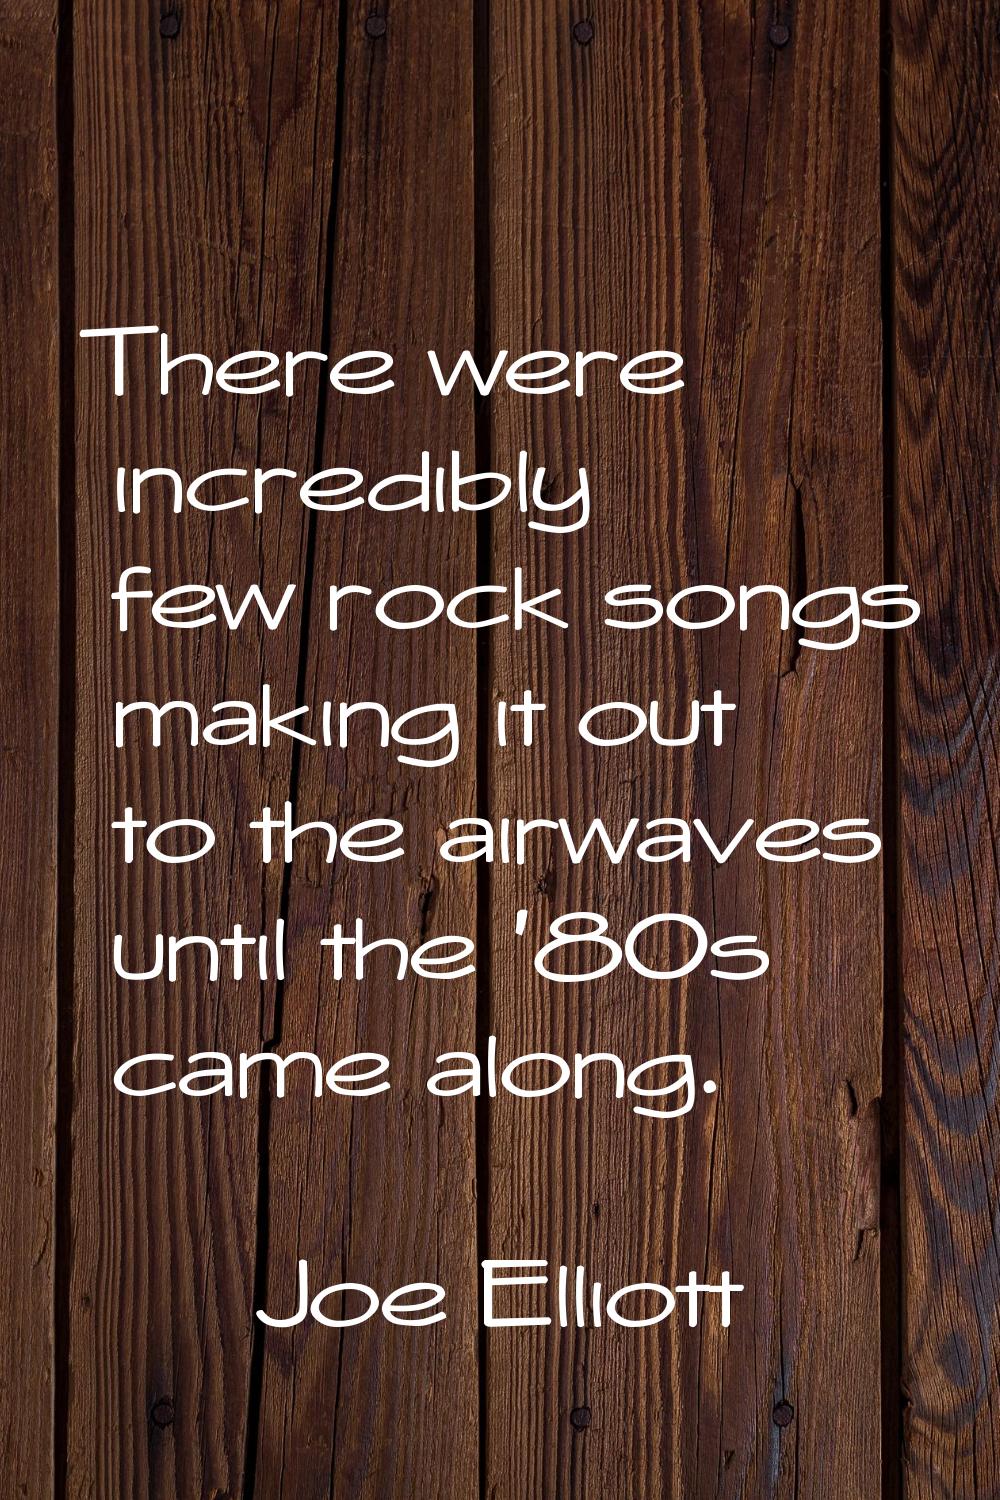 There were incredibly few rock songs making it out to the airwaves until the '80s came along.